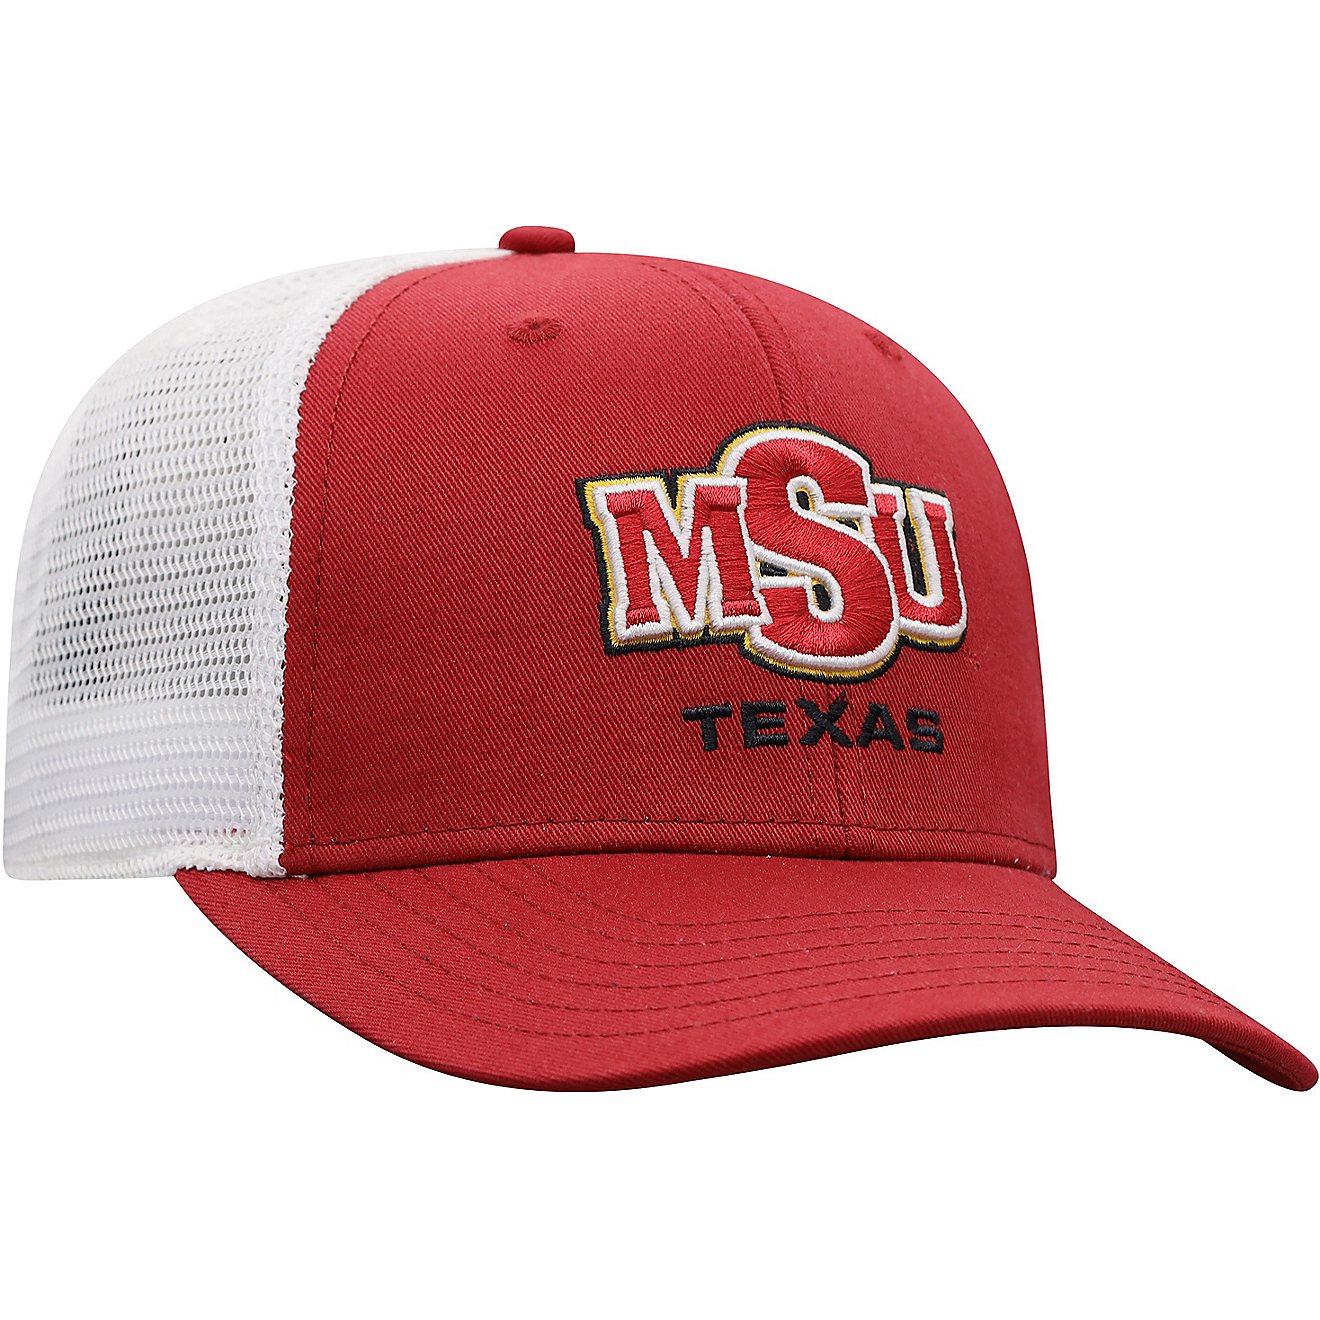 Top of the World Adults' Midwestern State University BB Adjustable Mesh 2-Tone Cap                                               - view number 3